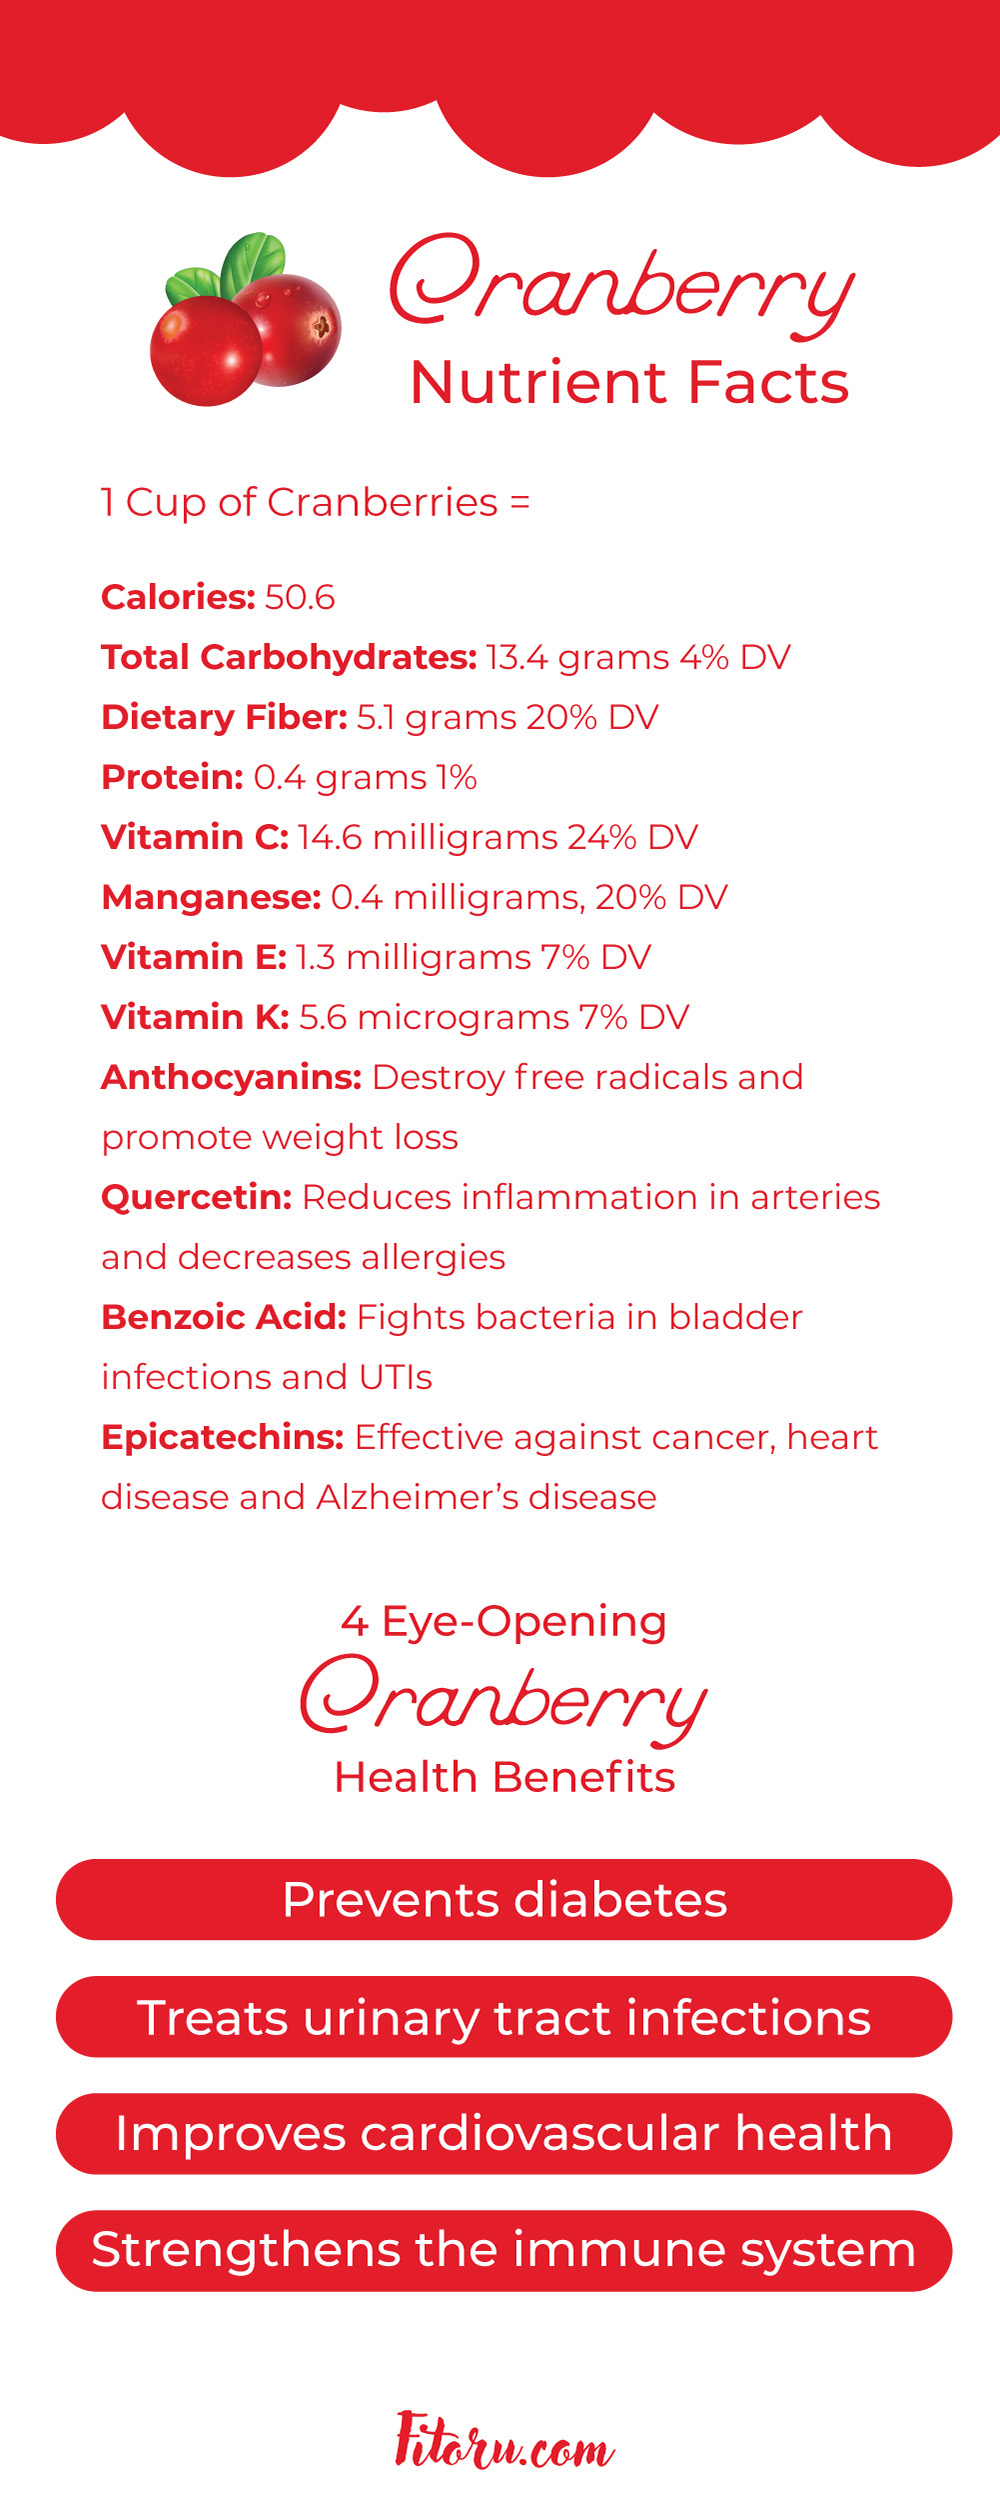 Explore cranberry nutrition facts and how to enjoy them anytime!